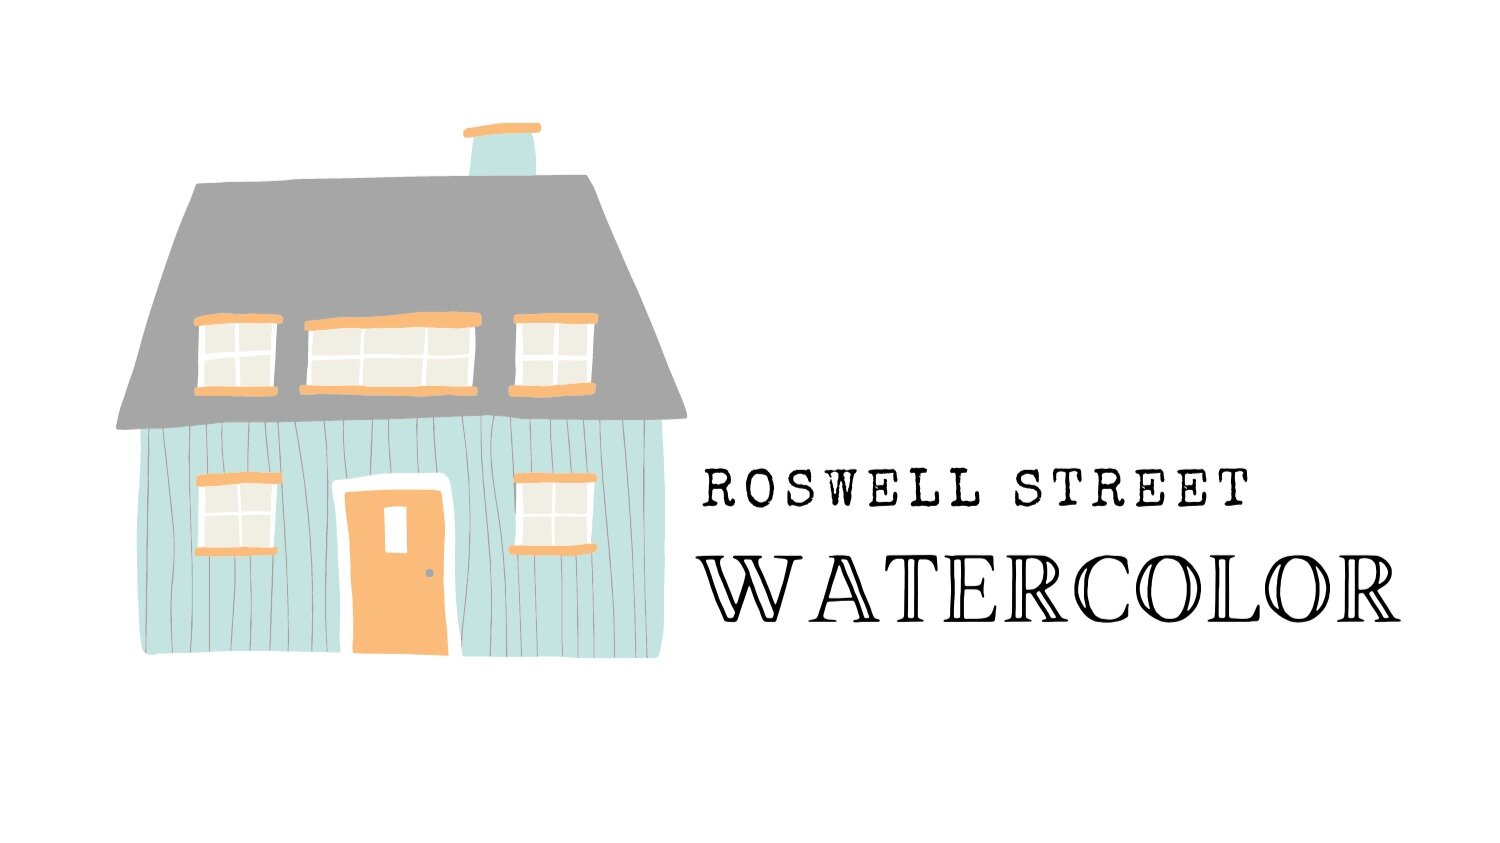 Roswell Street Watercolor